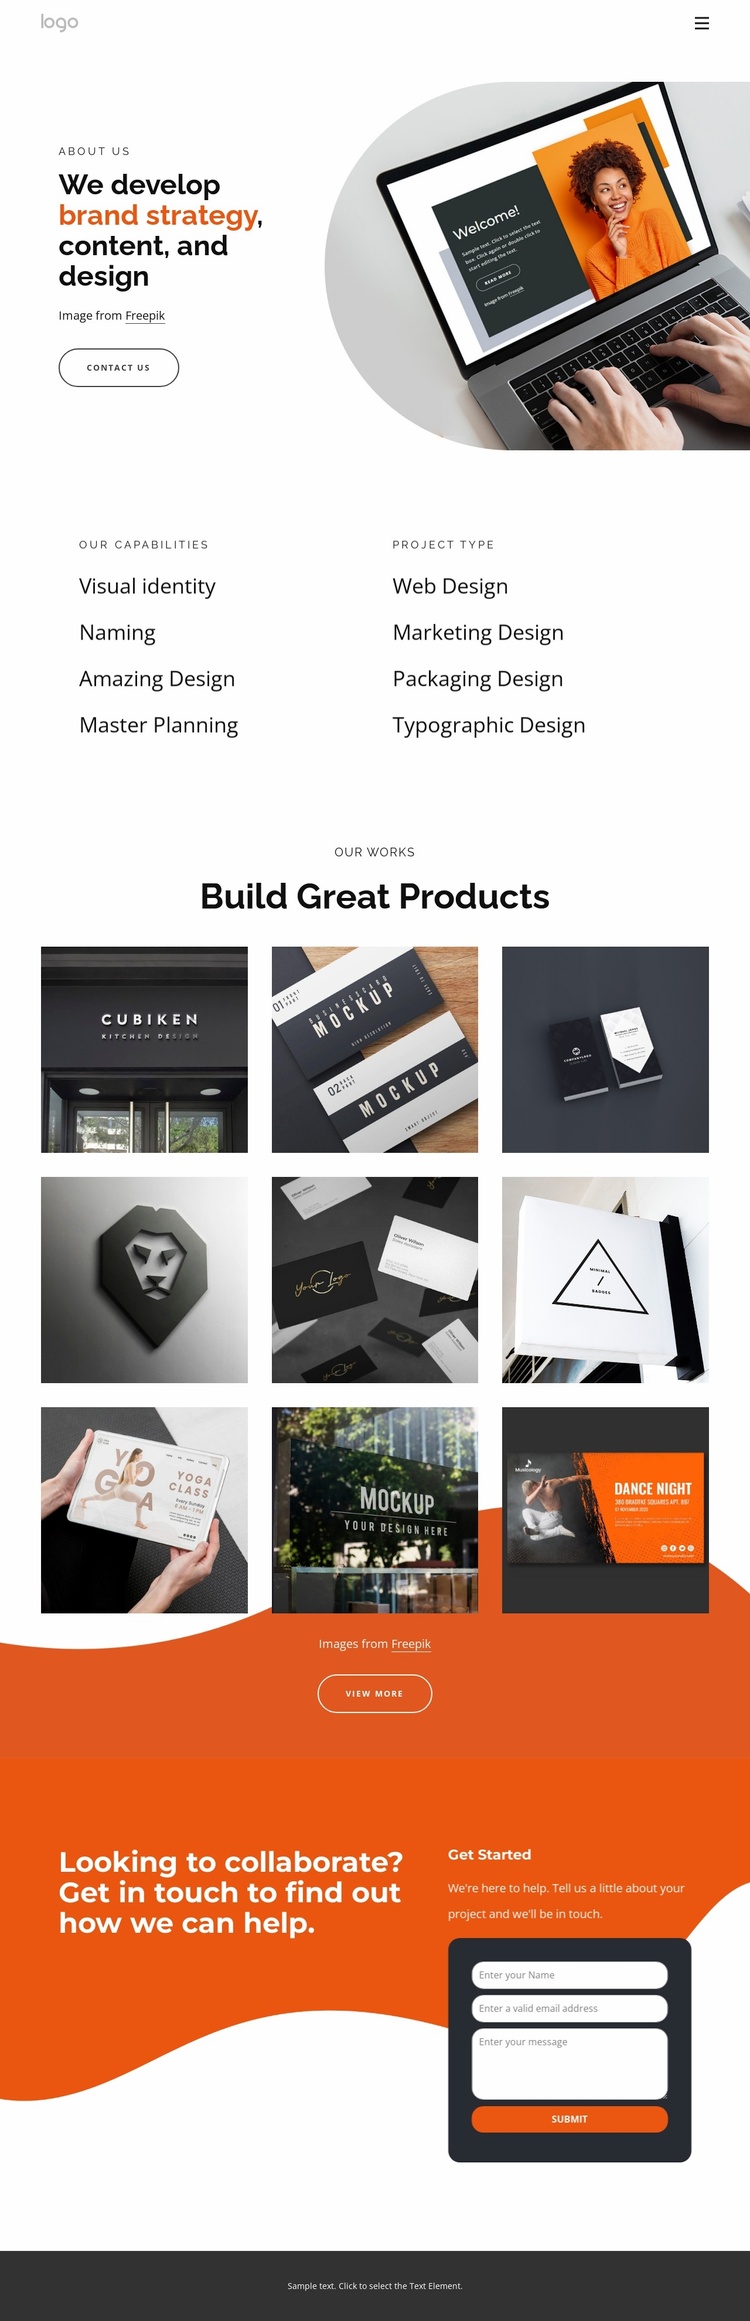 We create thoughtful experiences for humans Ecommerce Website Design